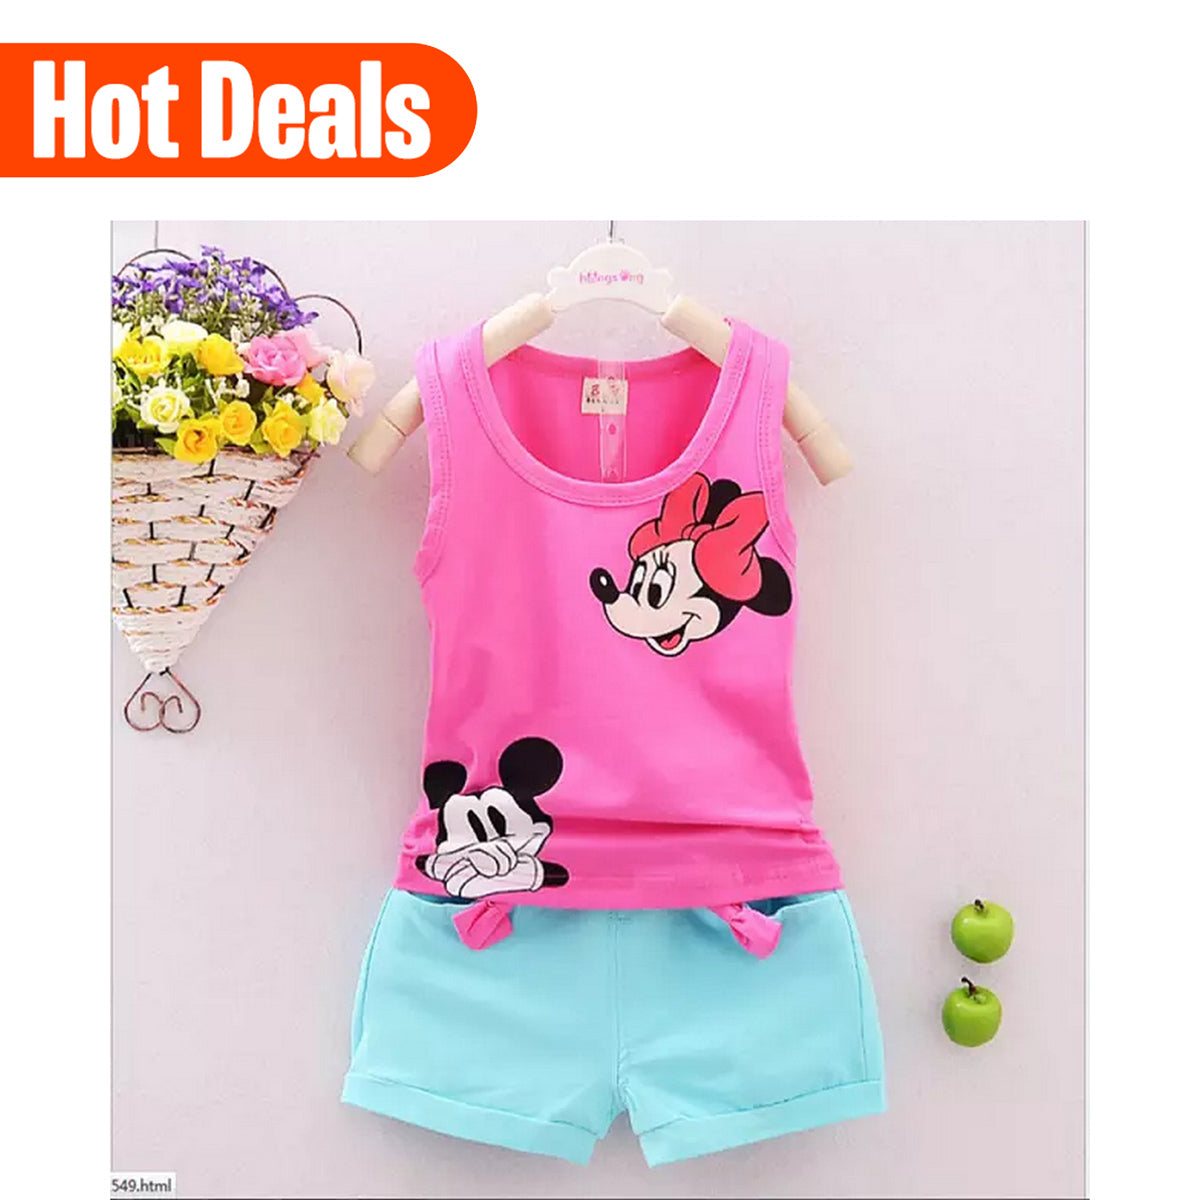 Micky Mouse T-Shirt And Shorts For Kids - Pink